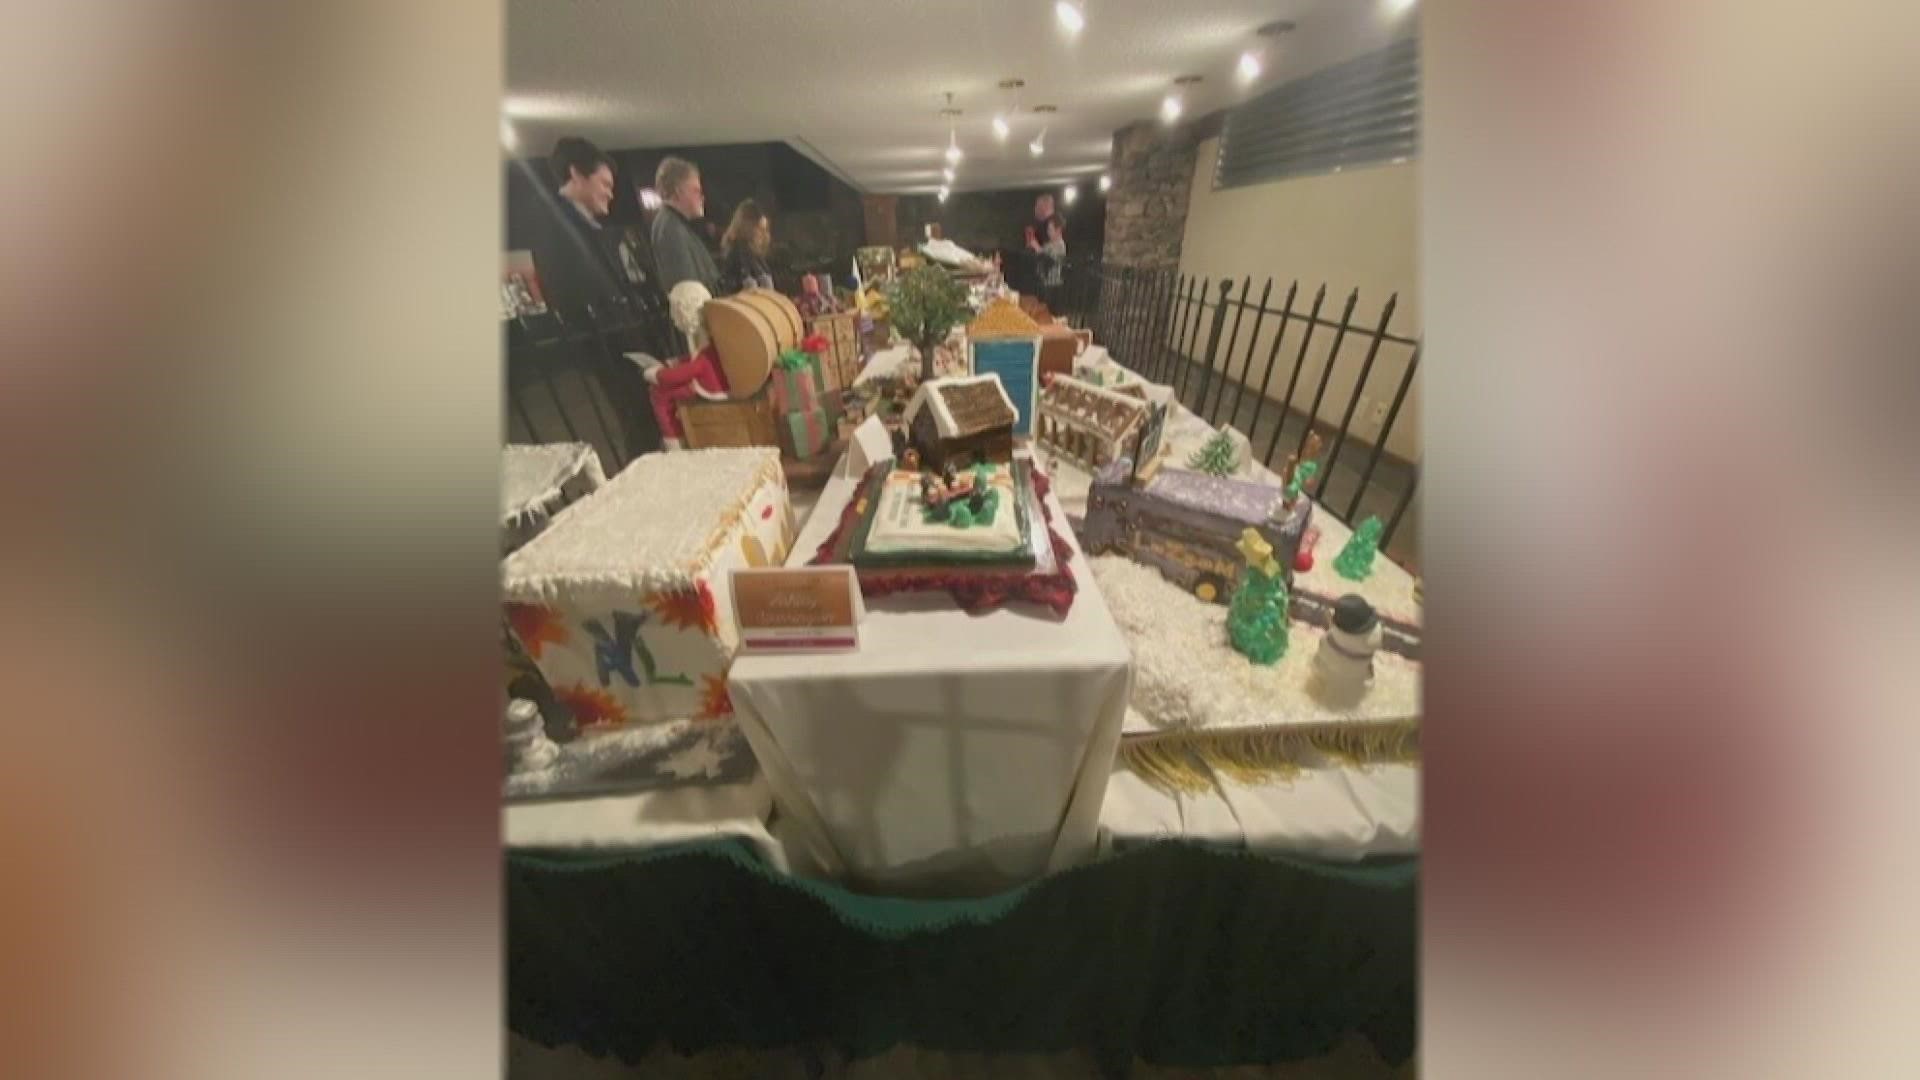 The National Gingerbread House Competition celebrated its 30th anniversary this year. It was held in Asheville, North Carolina.